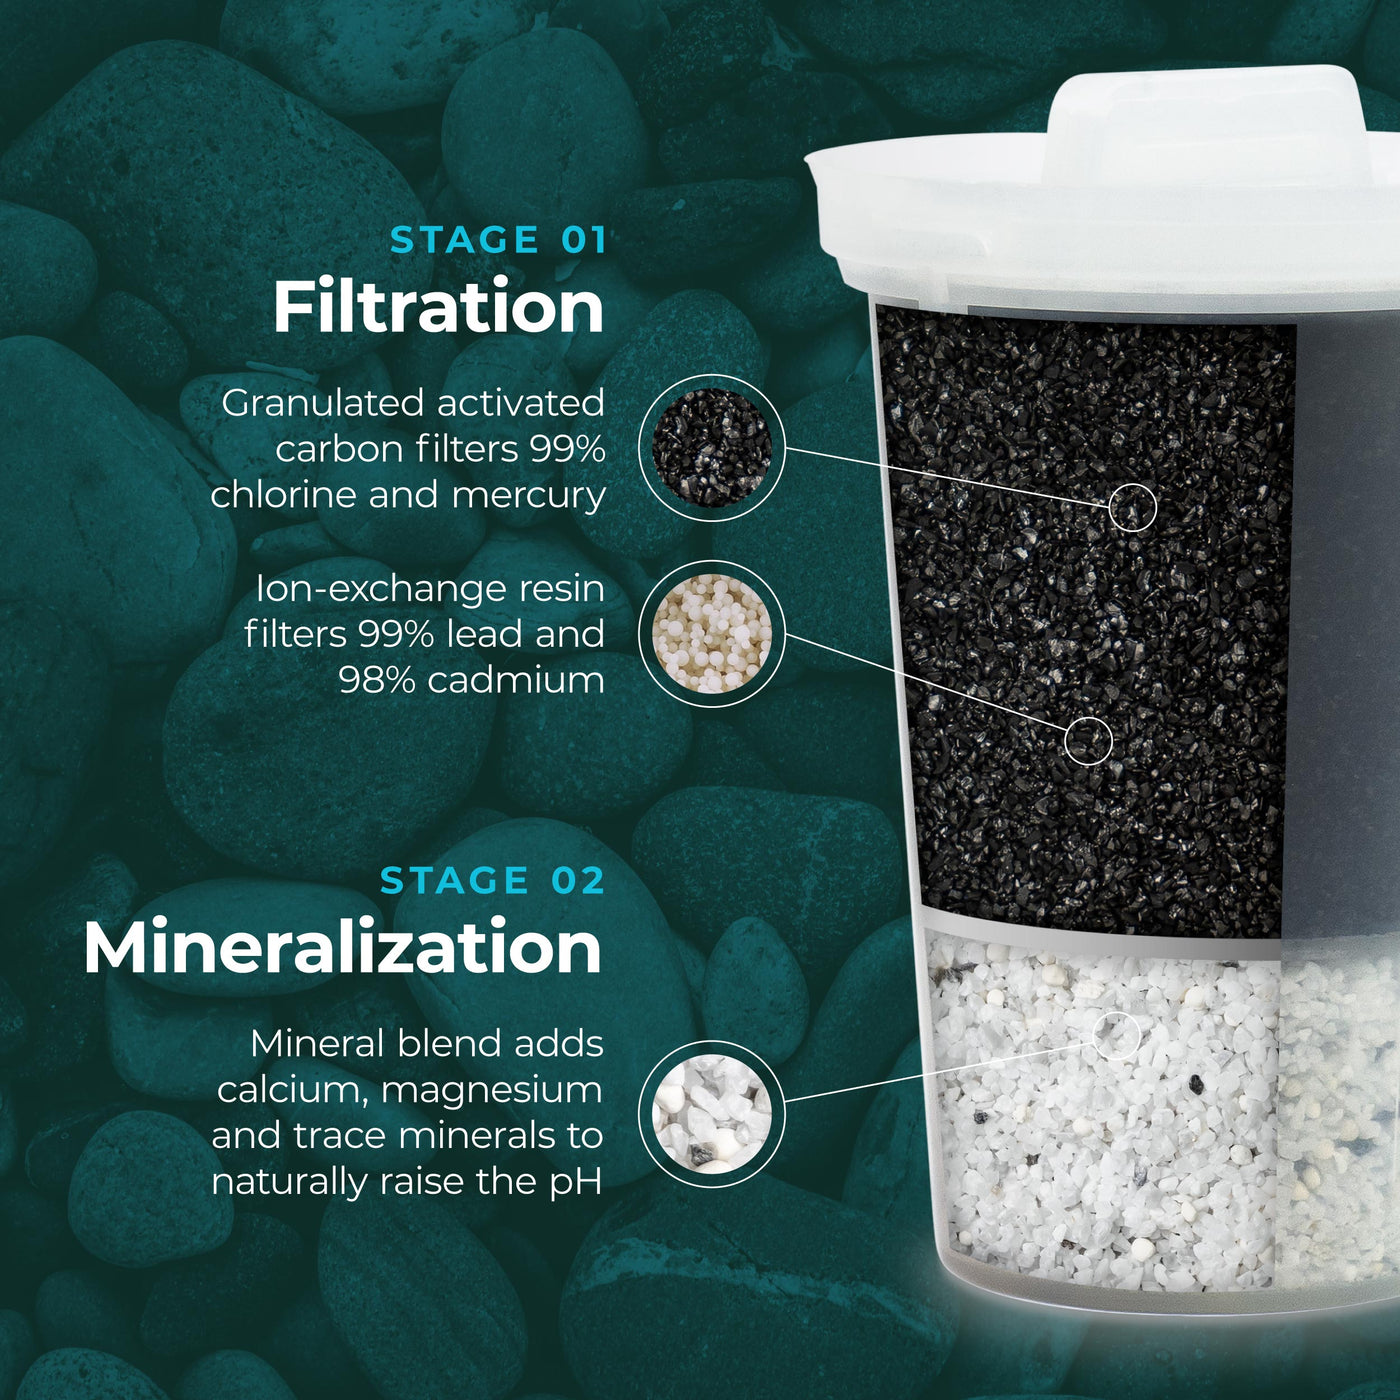 The Santevia MINA Alkaline Pitcher filter cutaway showing the granulated activated carbon and minerals within the filter#color_black